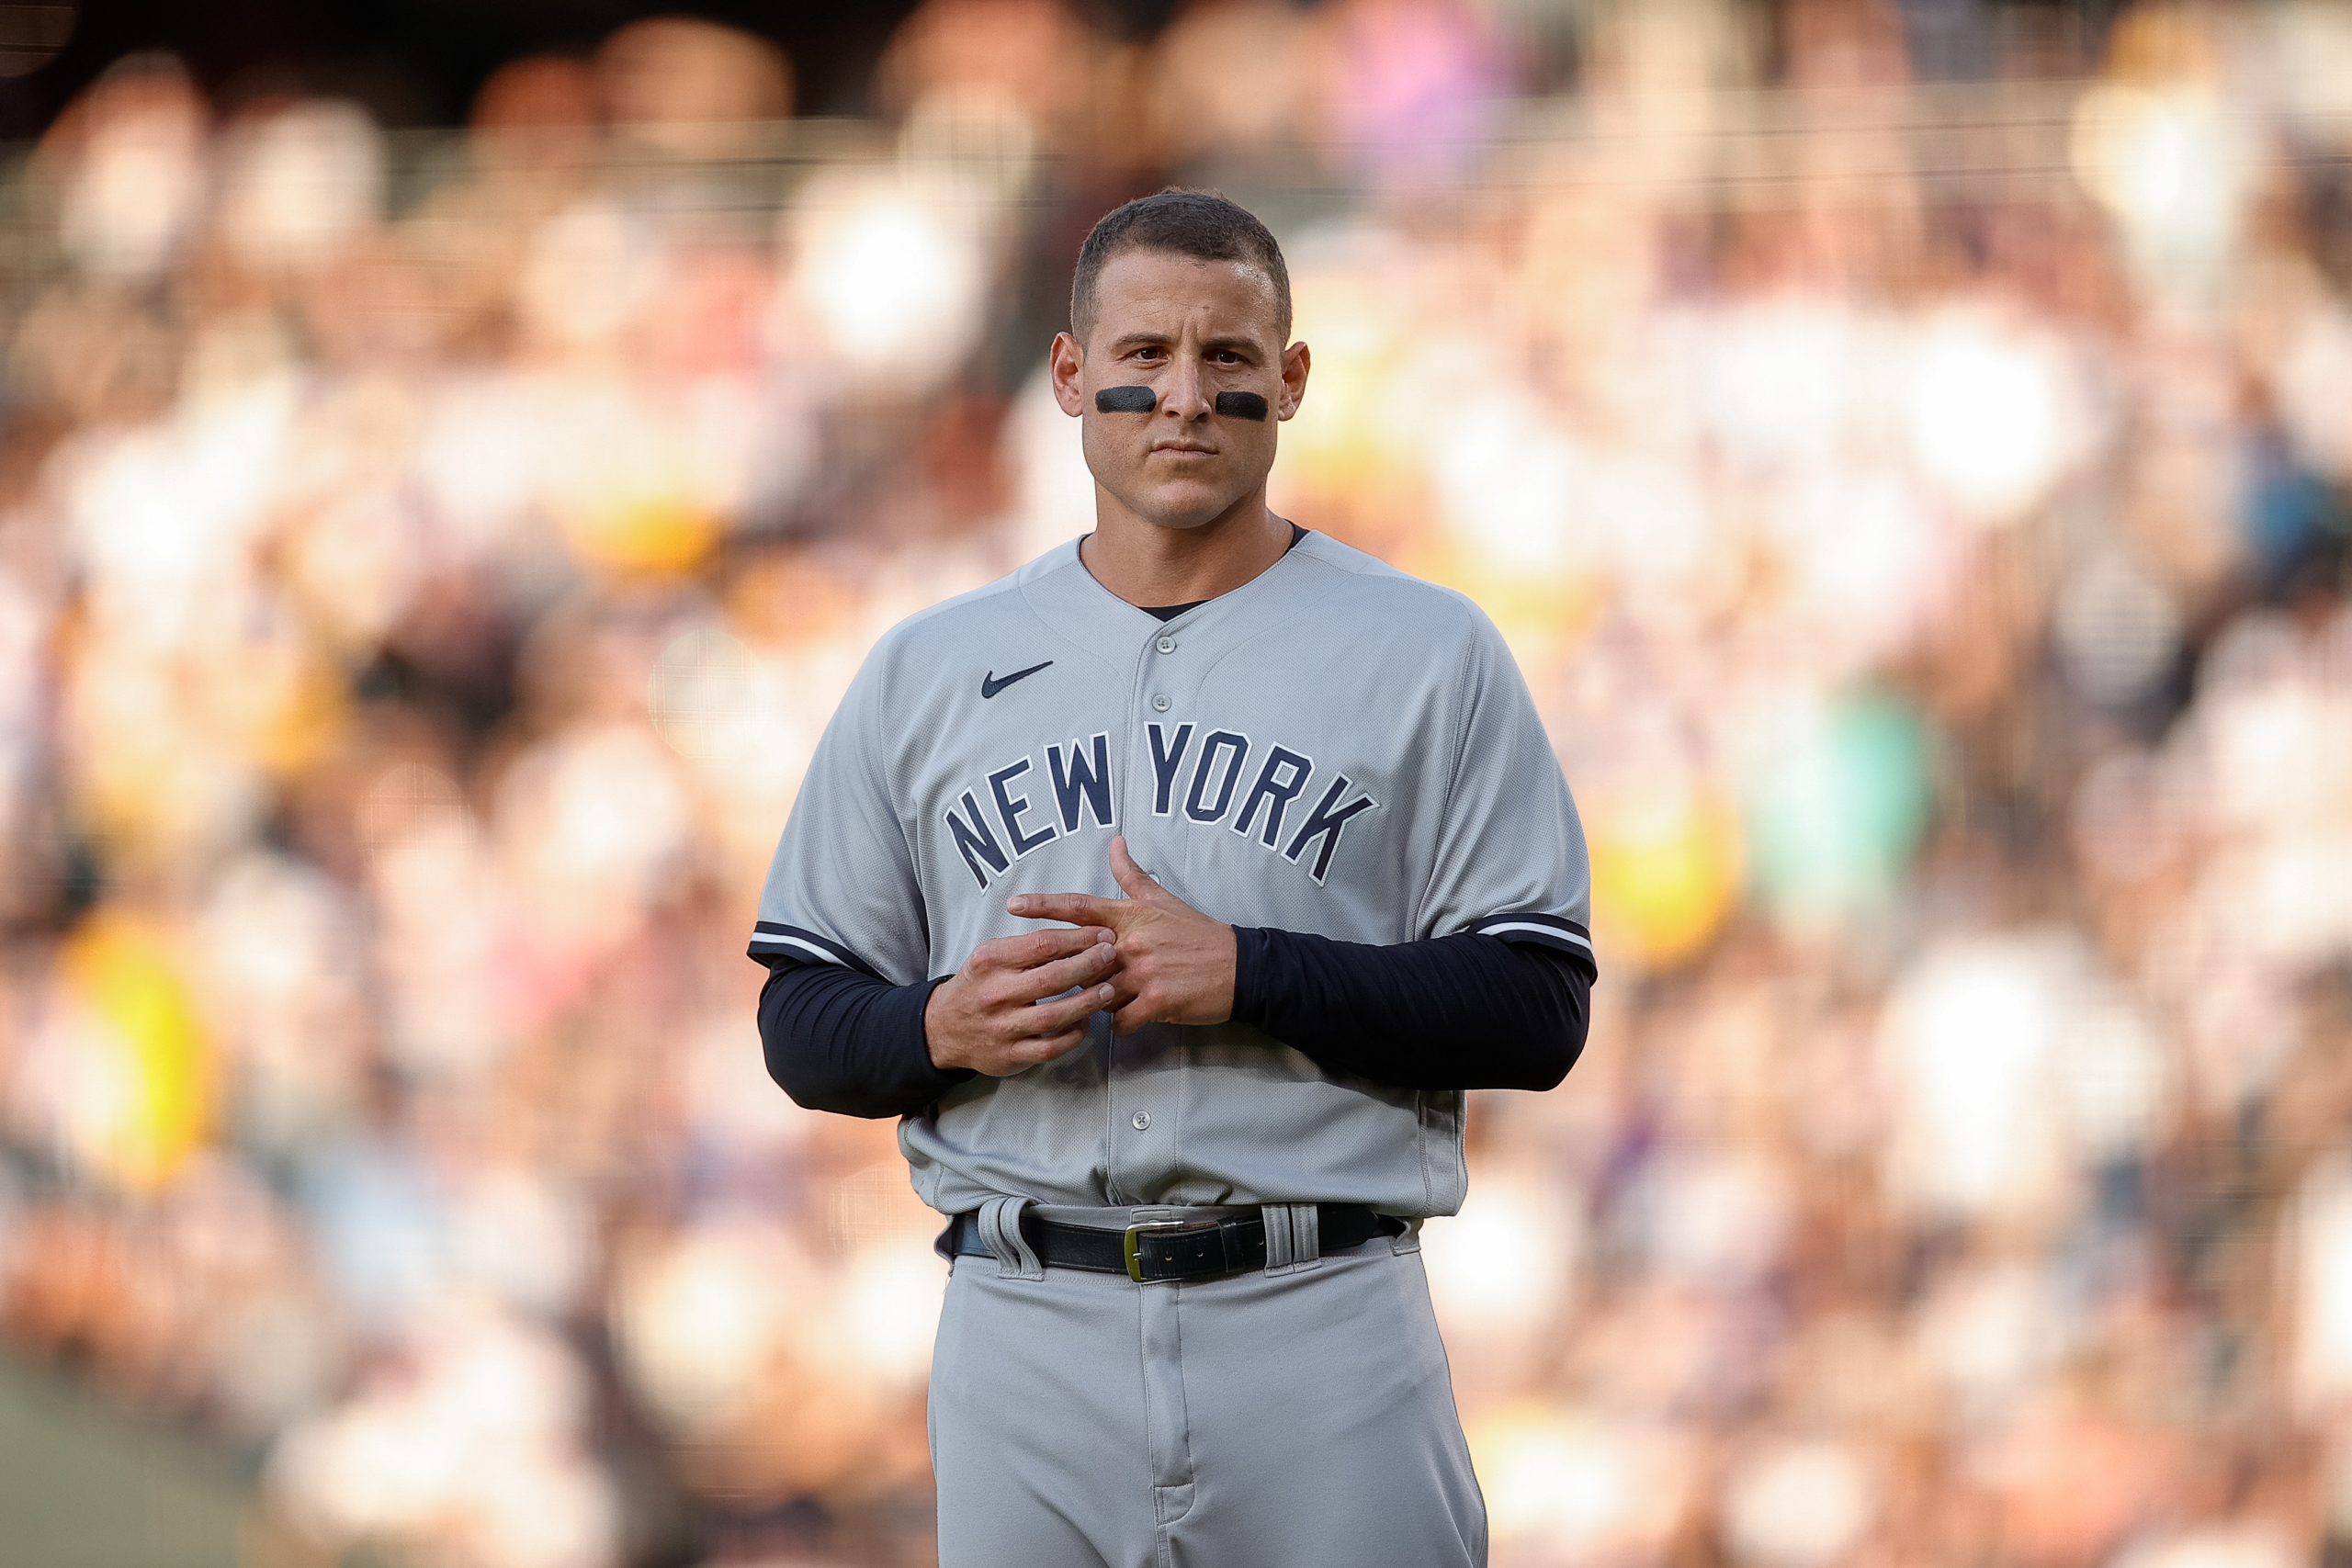 Should the New York Yankees implement an alternate jersey?